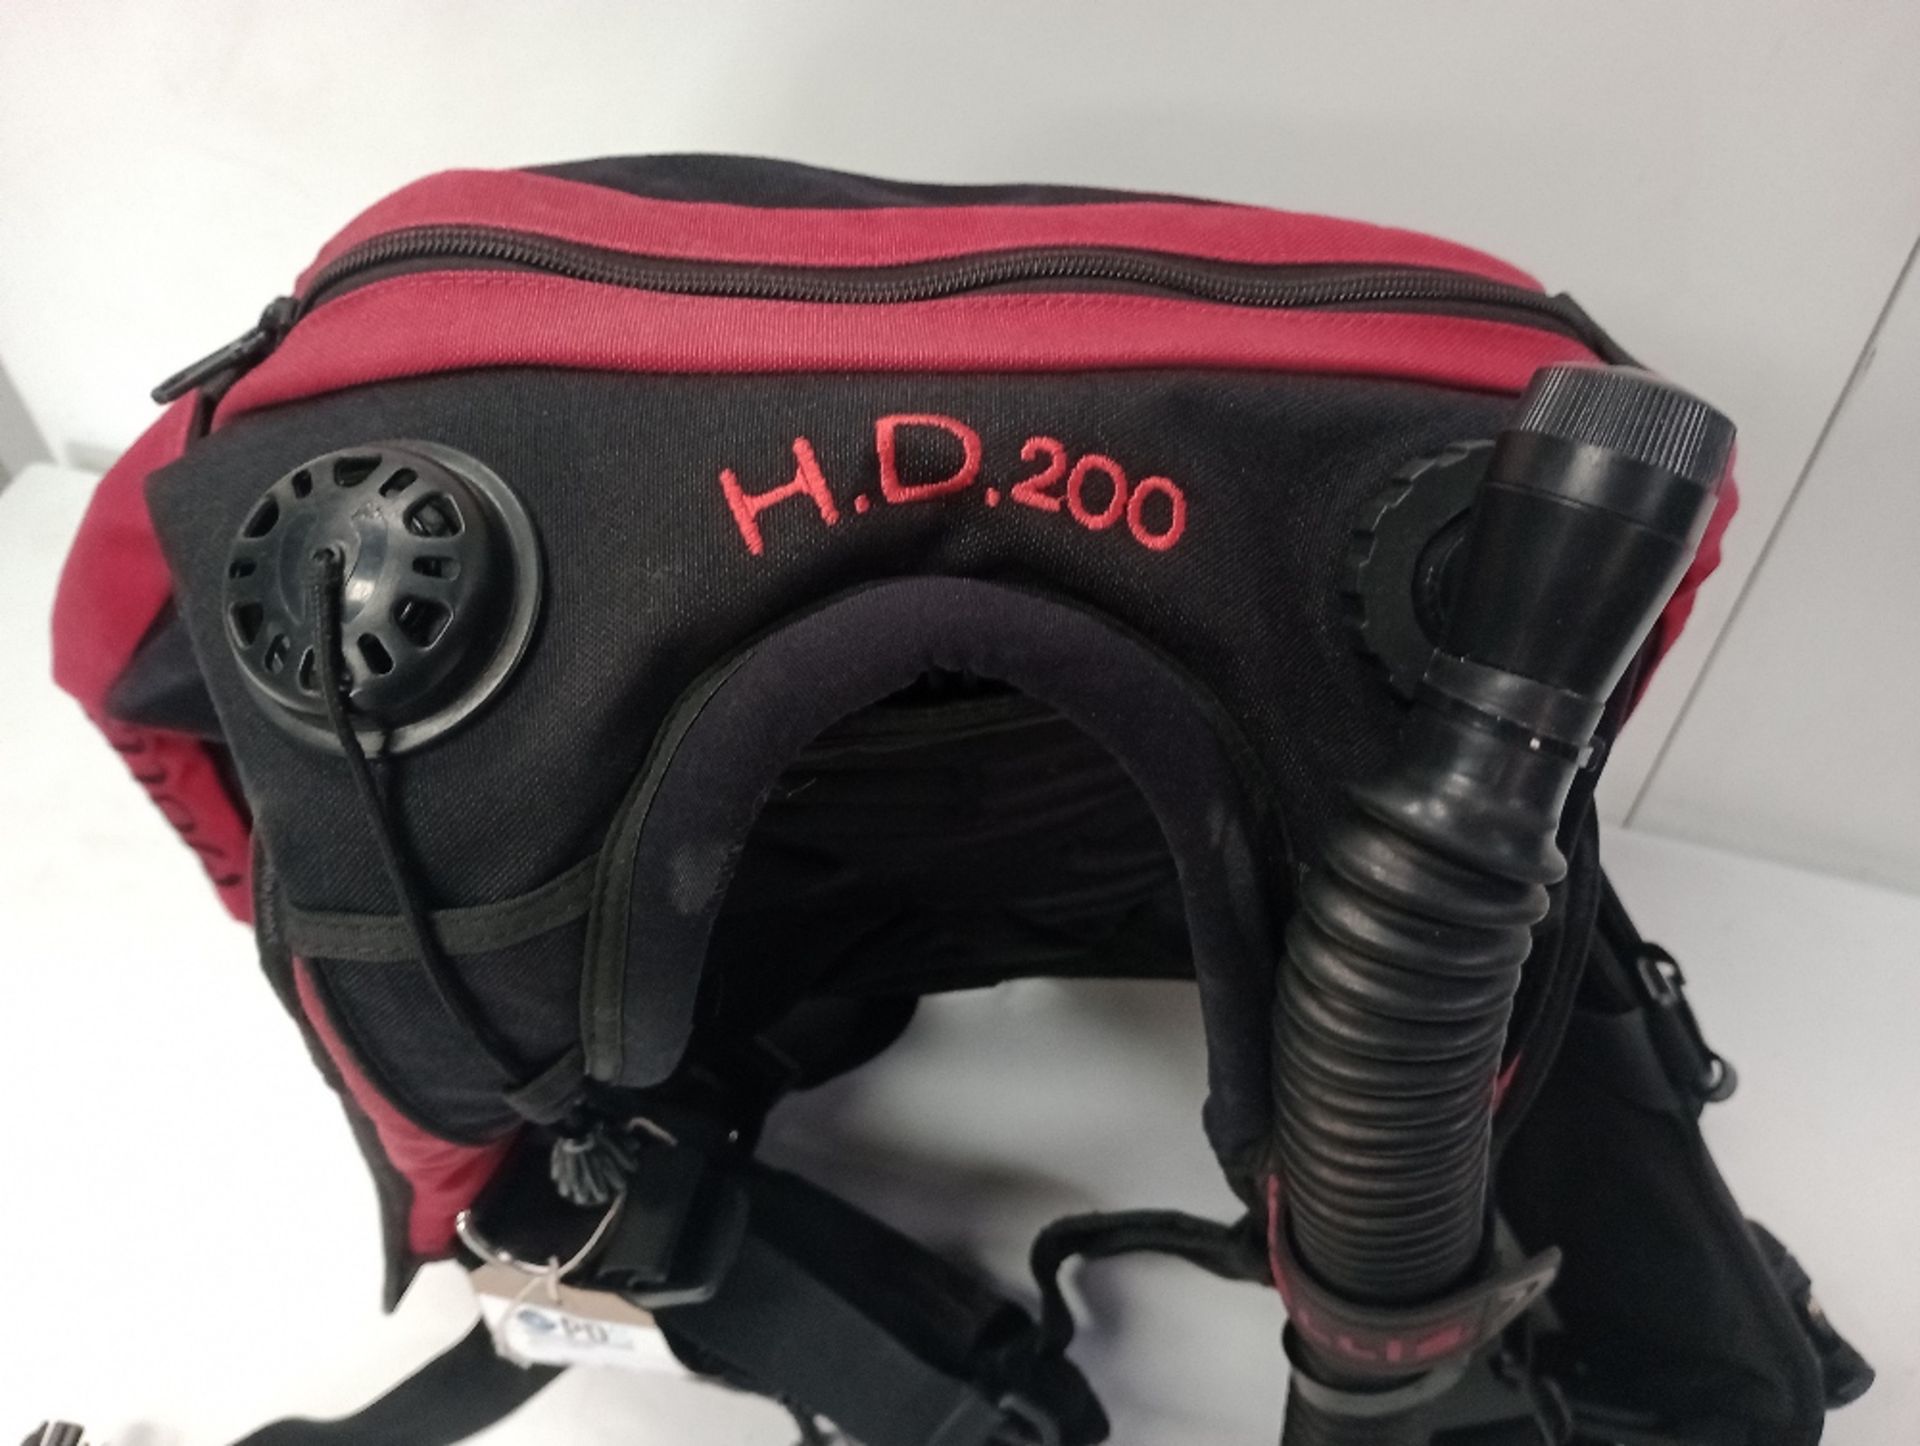 Hollis HD200 Buoyancy Control Device, Size L (Location: Brentwood. Please Refer to General Notes) - Image 3 of 4